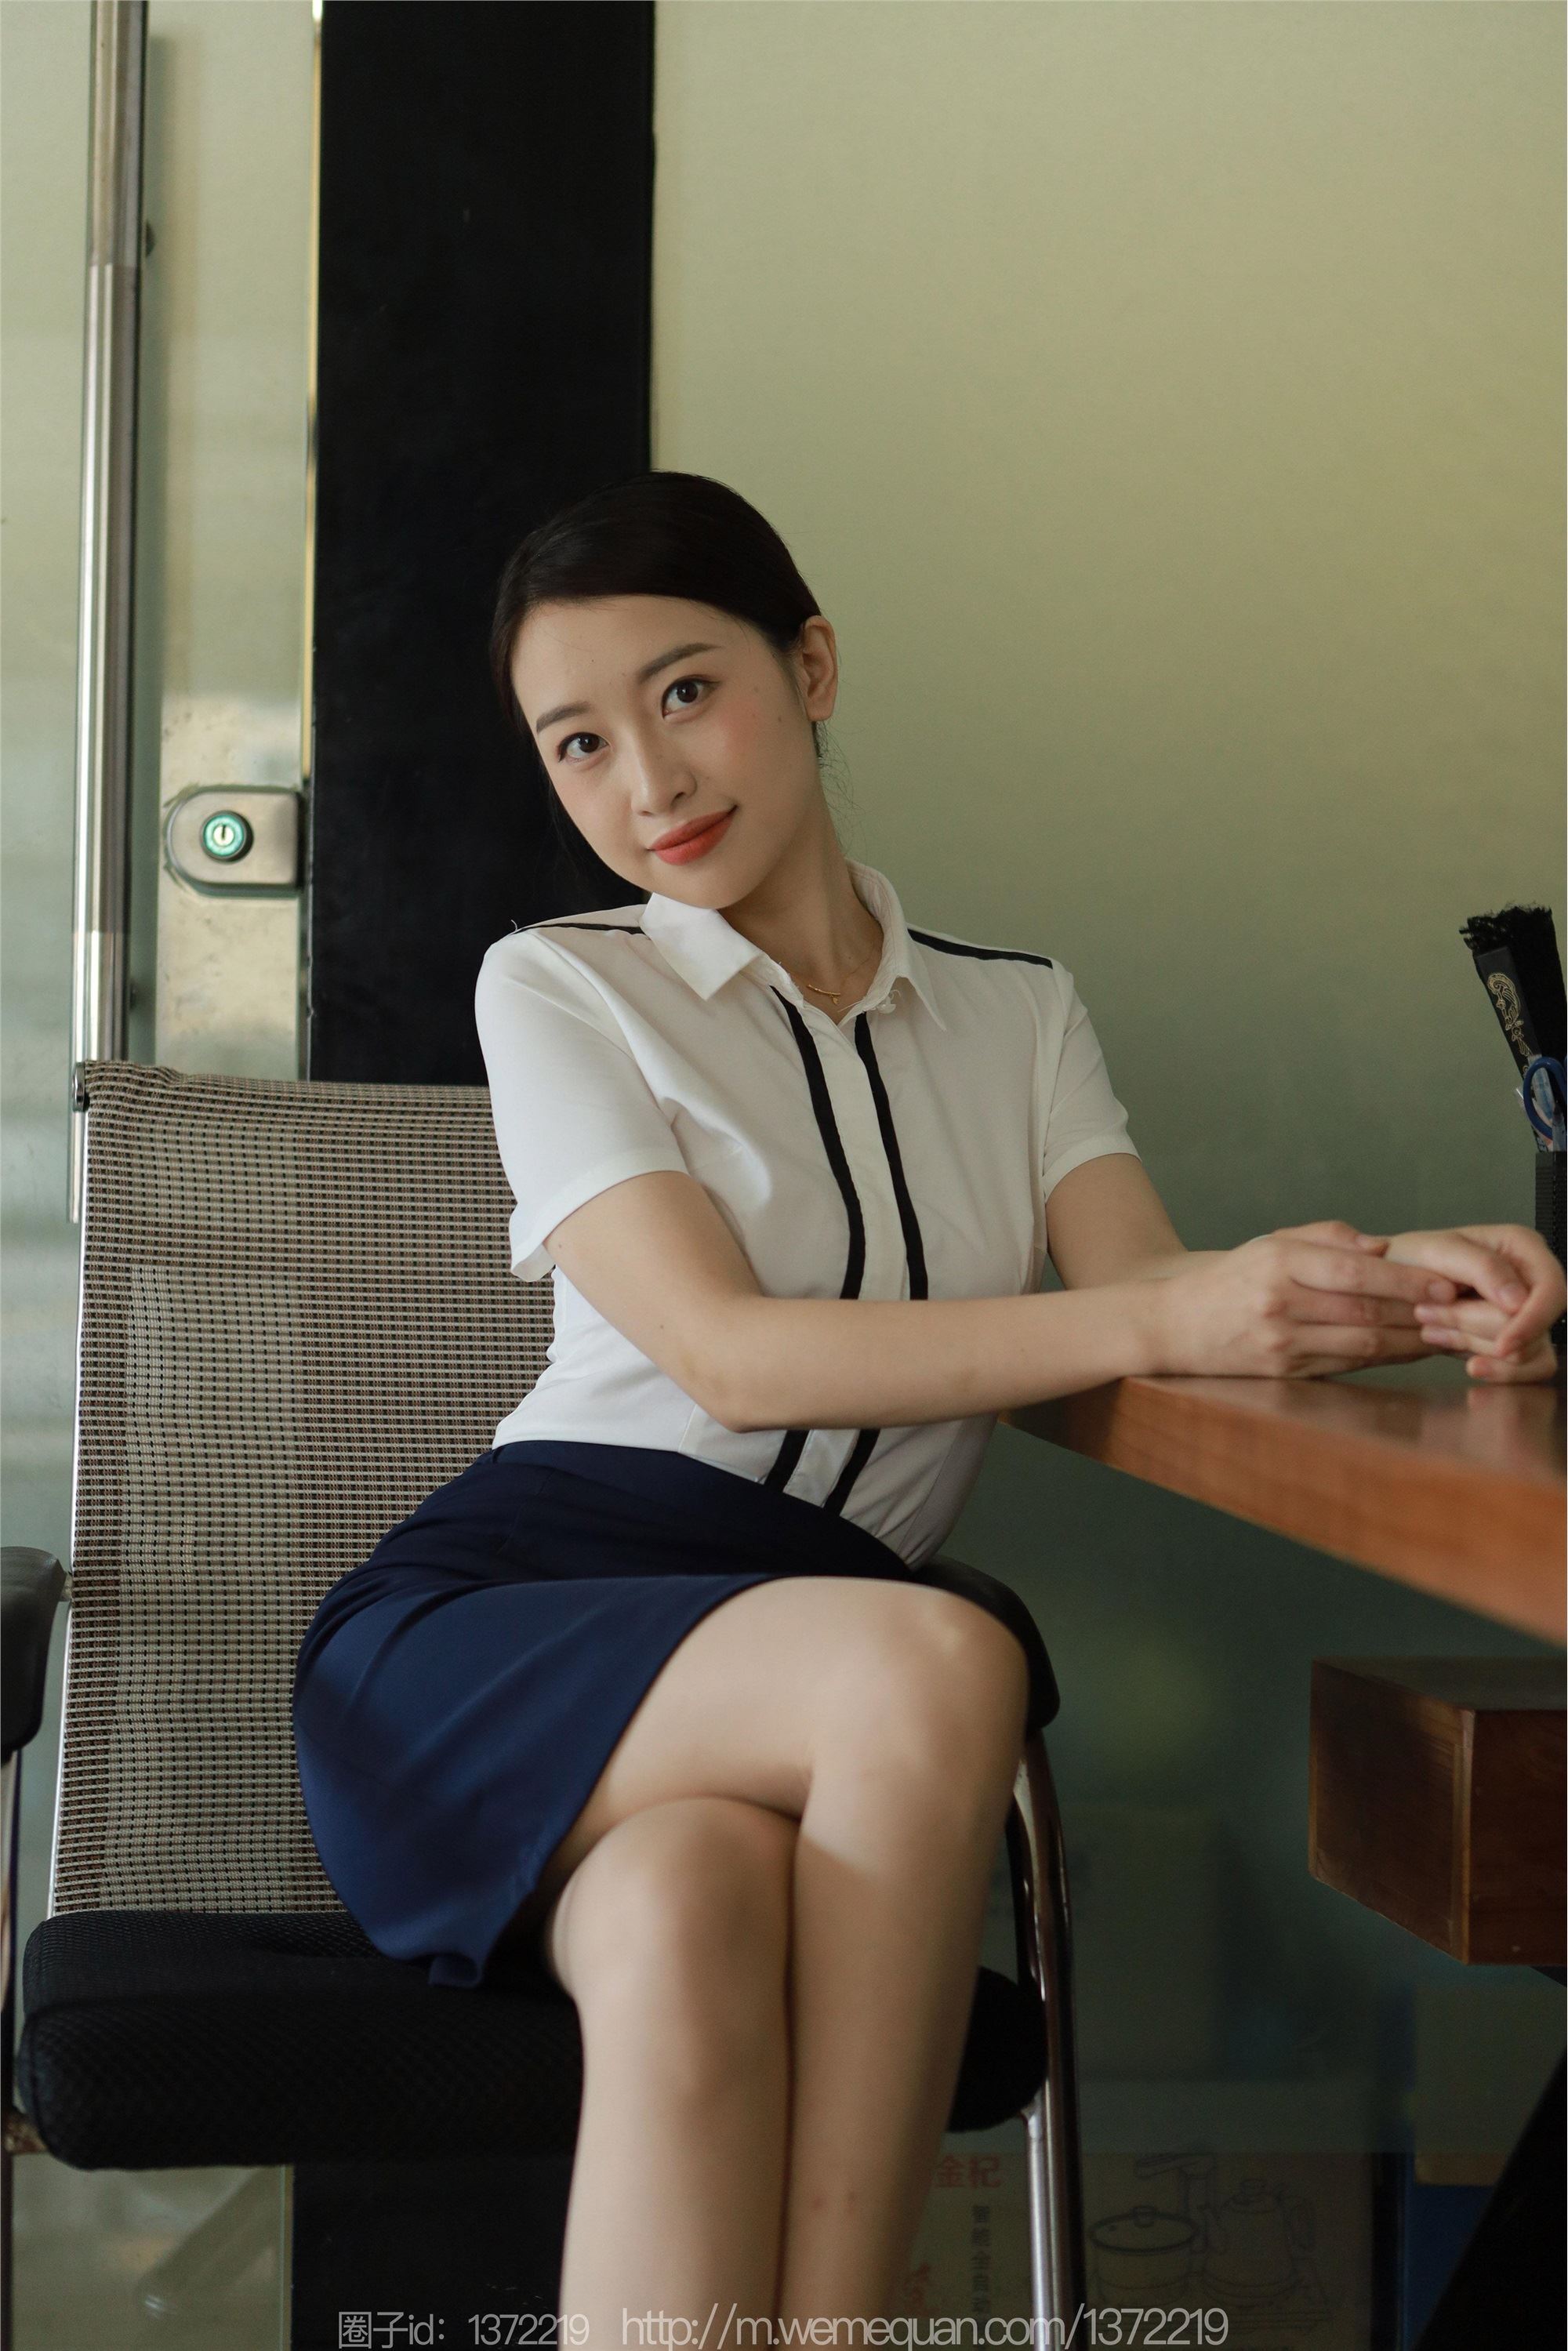 IESS's Strange Thoughts and Fun Directions on May 20, 2023, by Xiaojie from Sixiang Home 1456, 